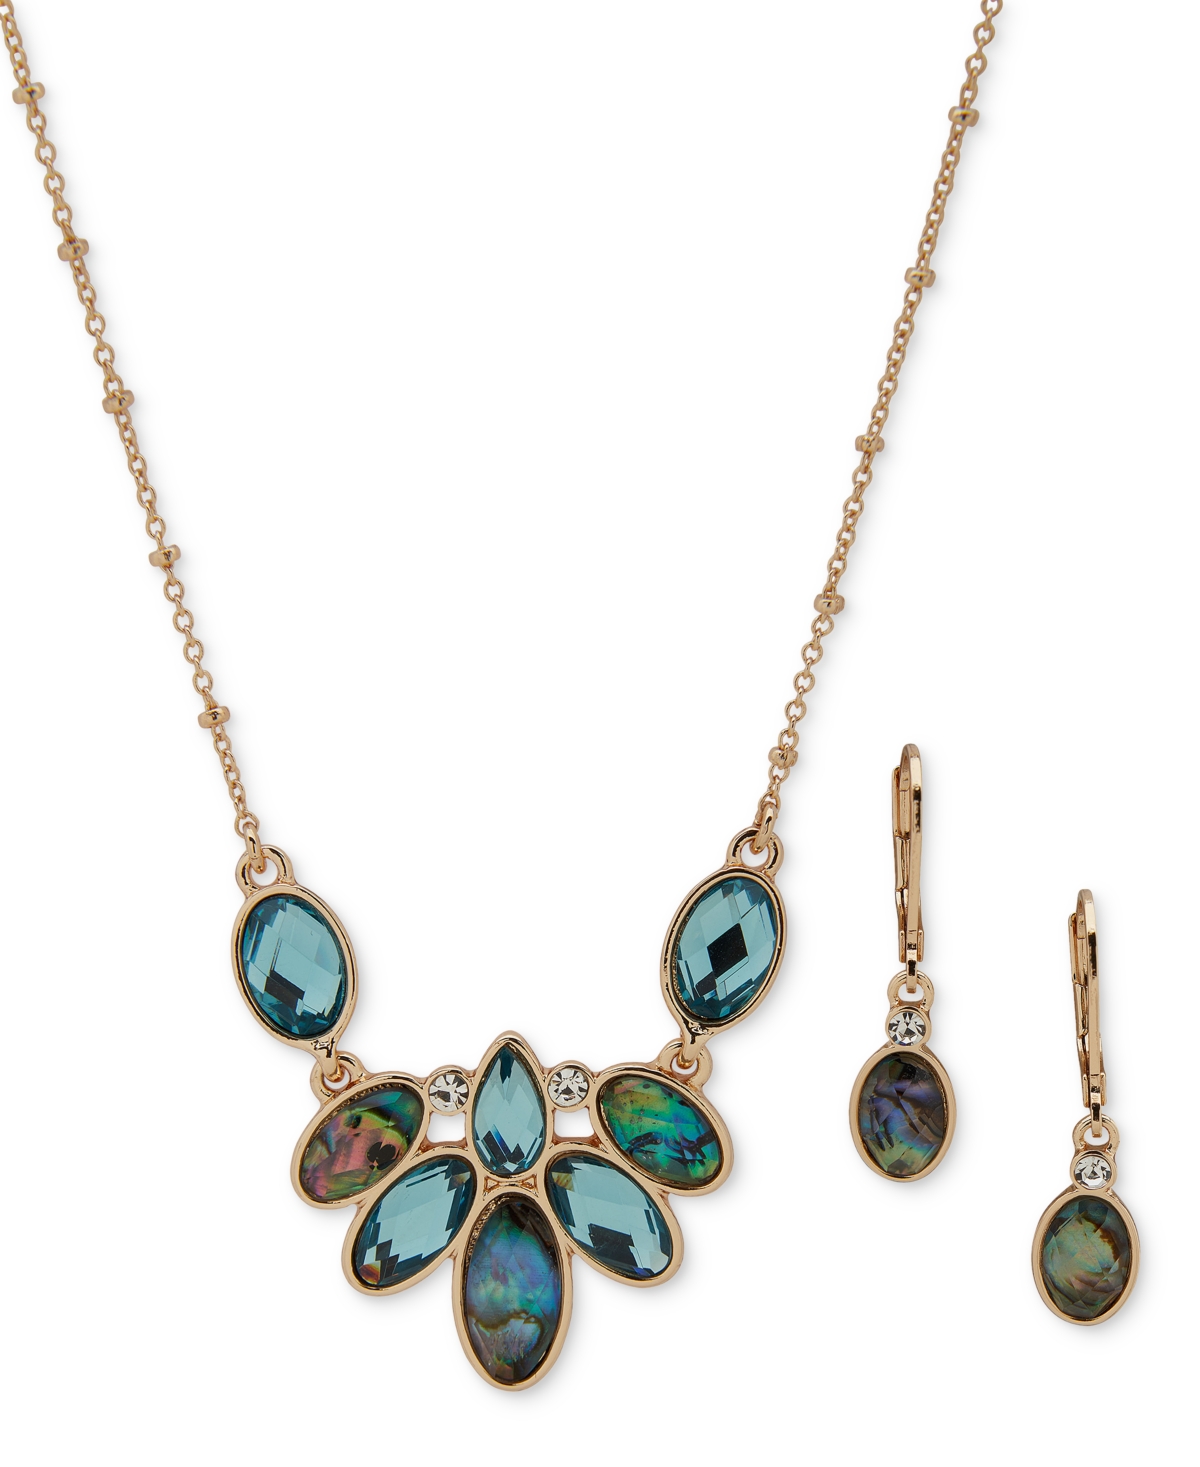 Gold-Tone Mixed Stone Statement Necklace & Drop Earrings Set - Blue